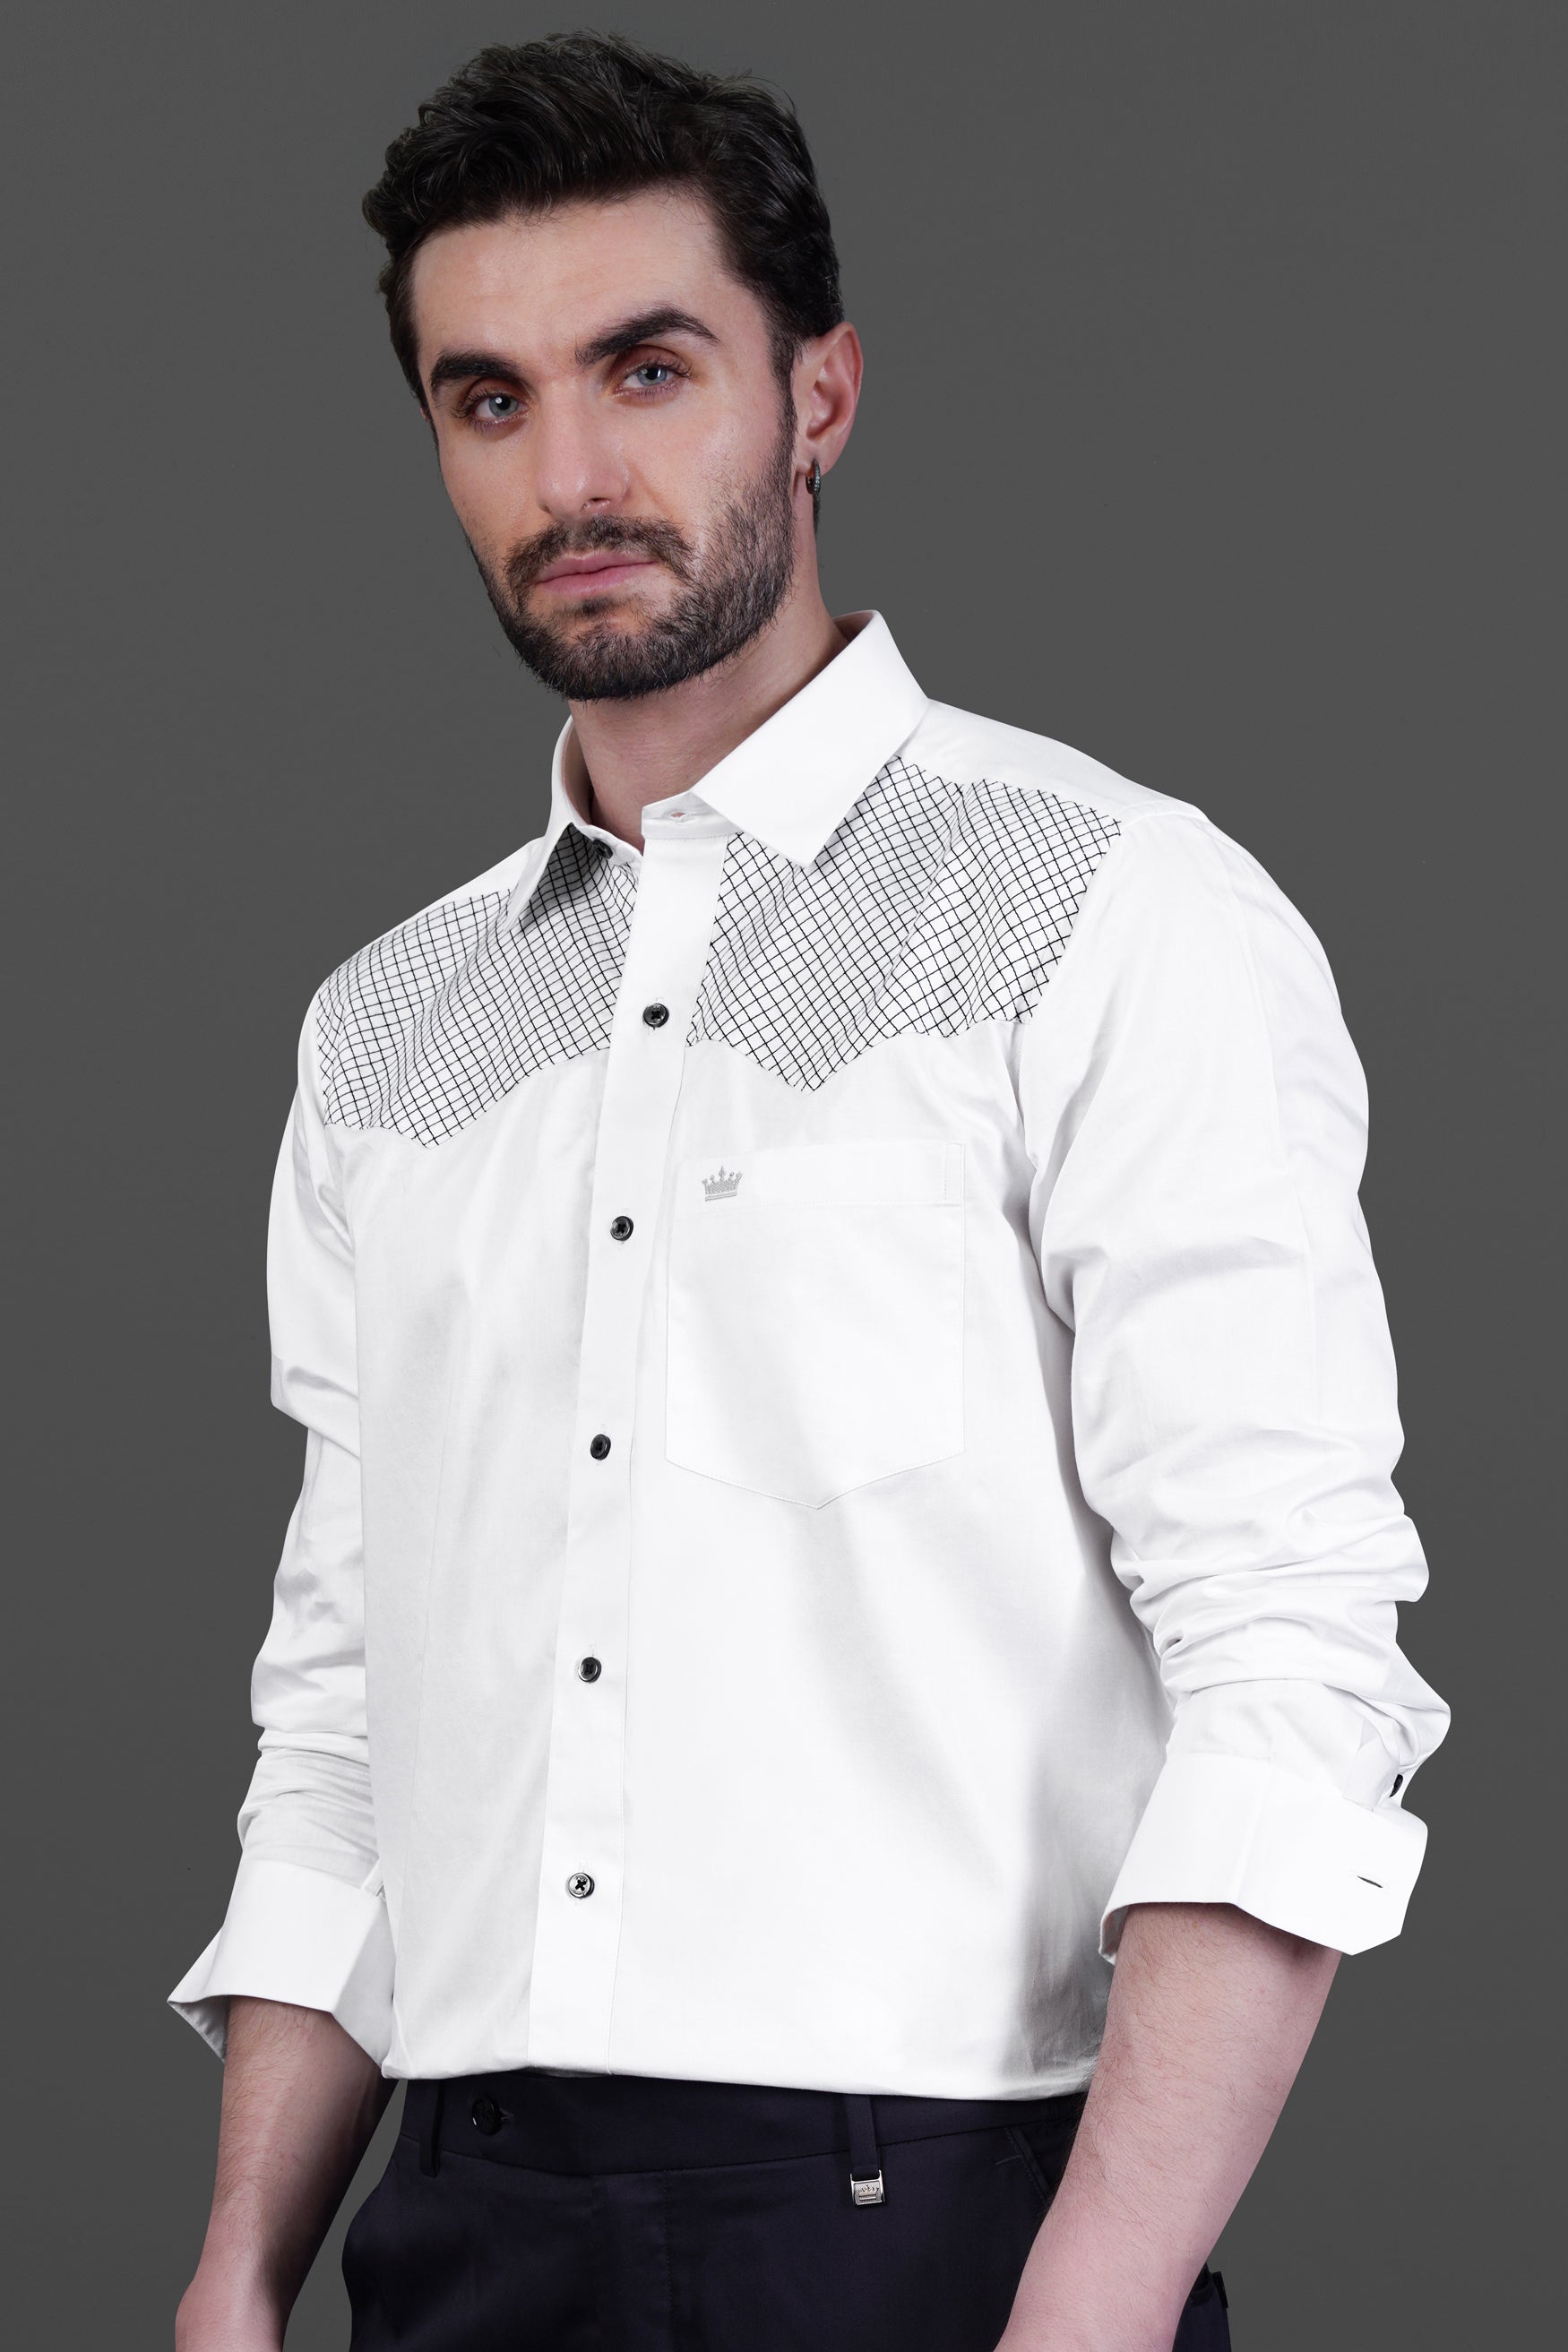 Bright White With Black Thread Art Formal/Casual plain-Solid Premium Cotton  Shirt For Men - Snitch Shirts